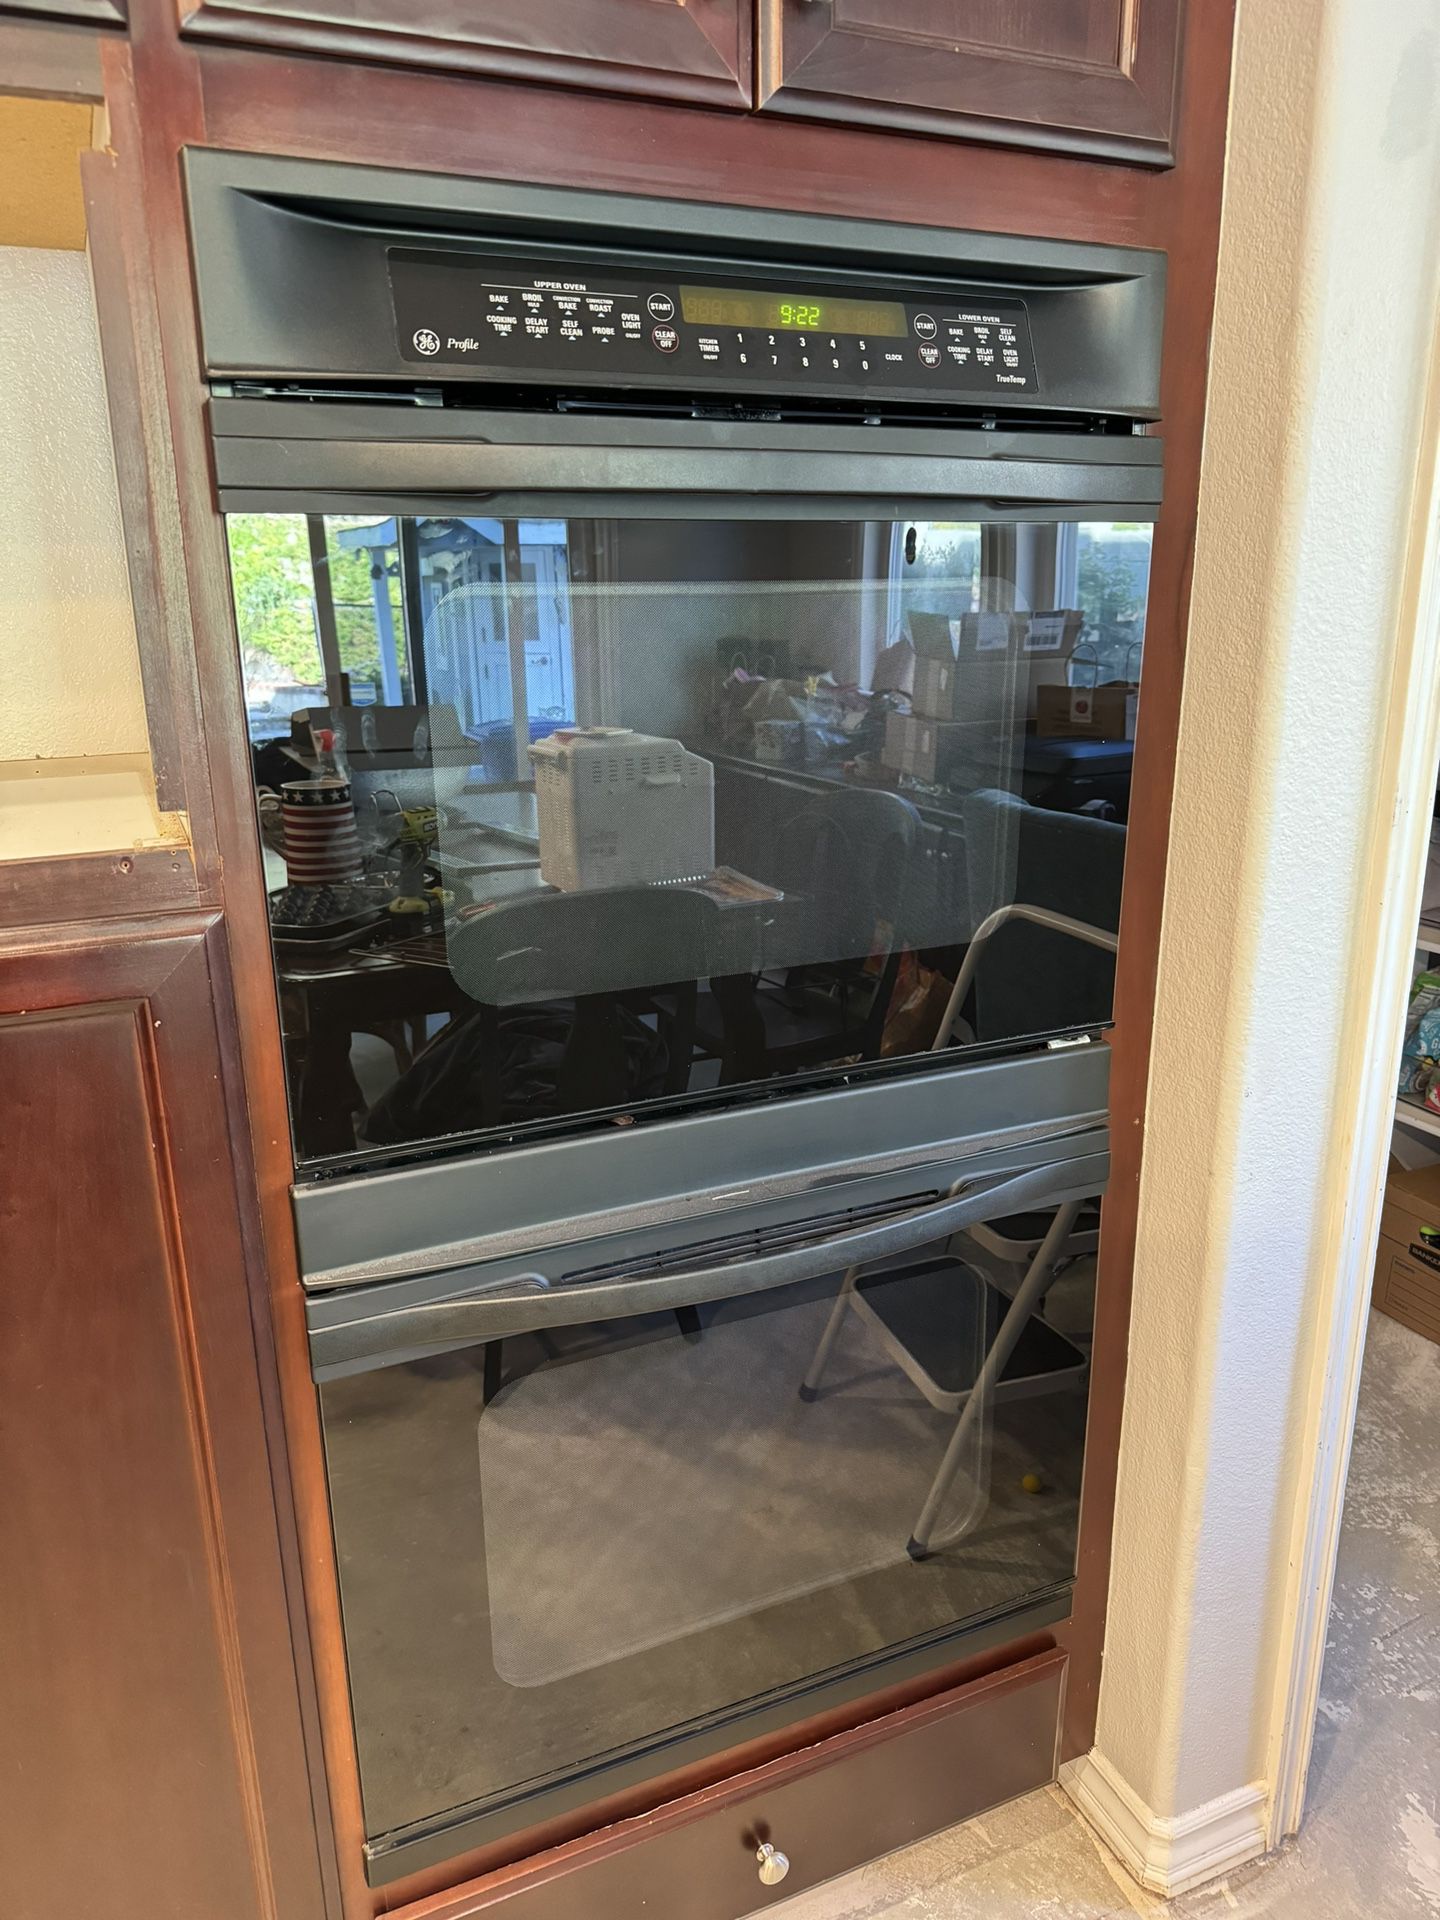 FREE - GE 30” Electric Double Oven